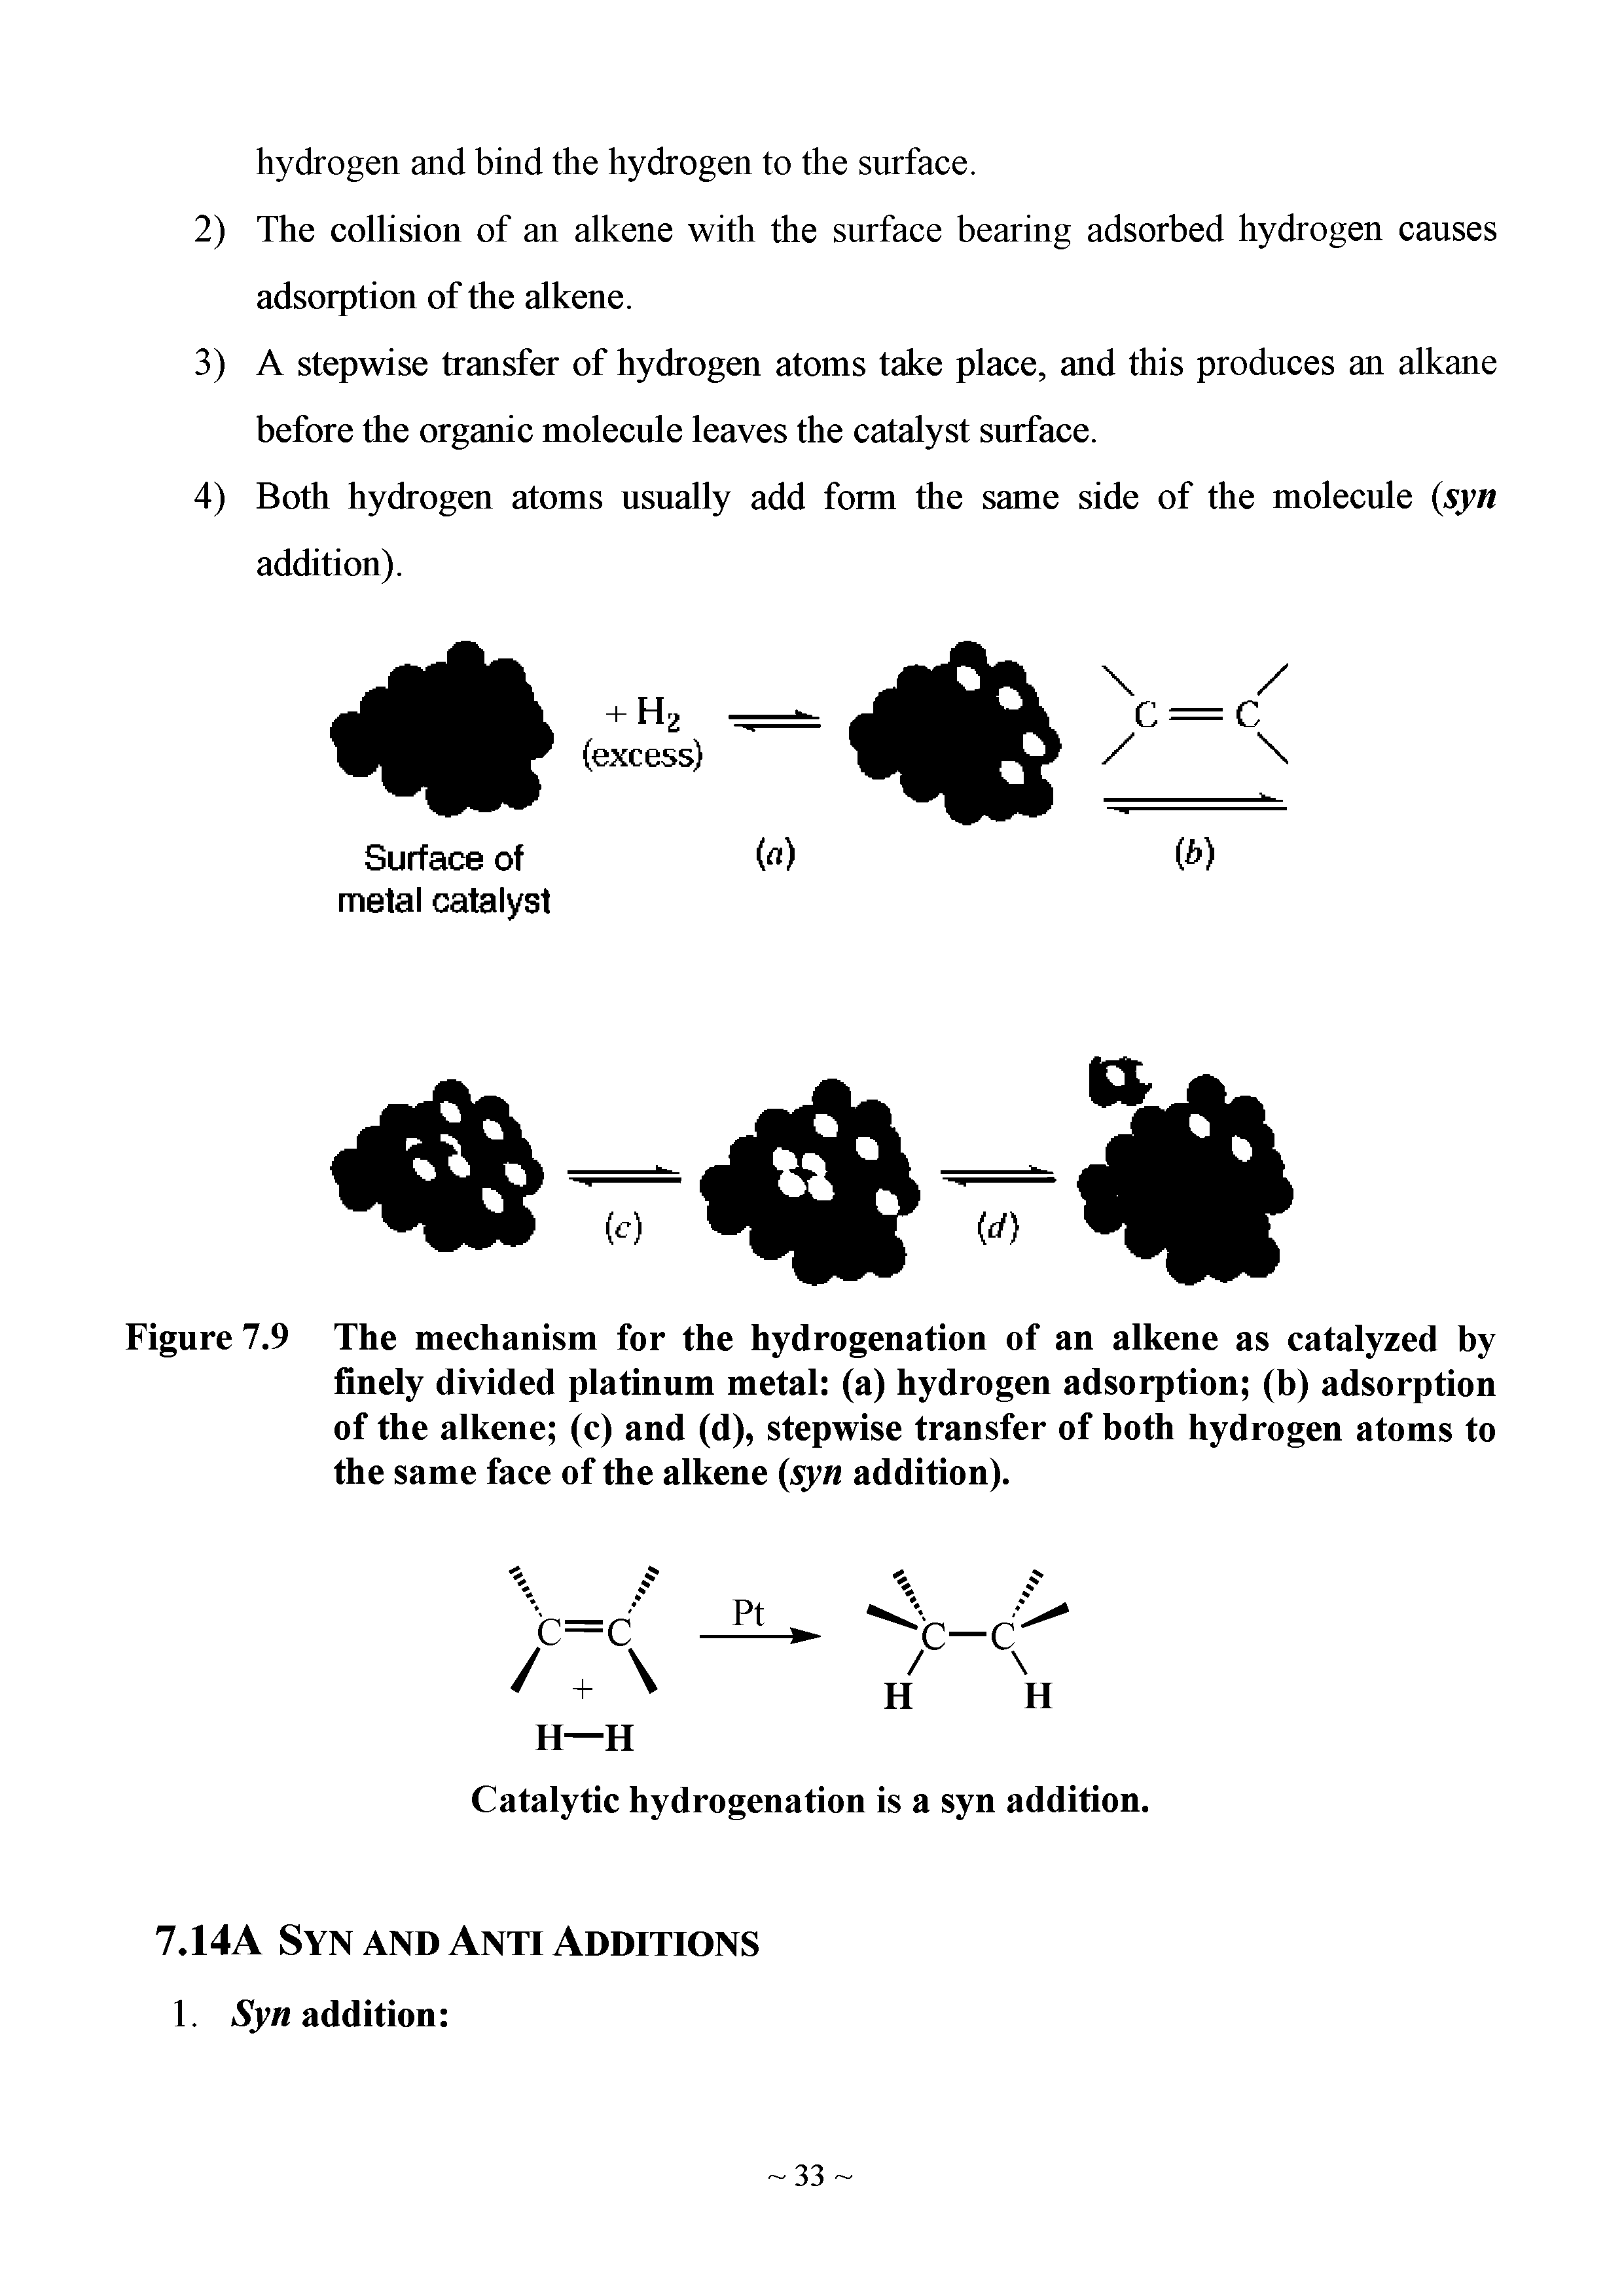 Figure 7.9 The mechanism for the hydrogenation of an alkene as catalyzed by finely divided platinum metal (a) hydrogen adsorption (b) adsorption of the alkene (c) and (d), stepwise transfer of both hydrogen atoms to the same face of the alkene (syn addition).